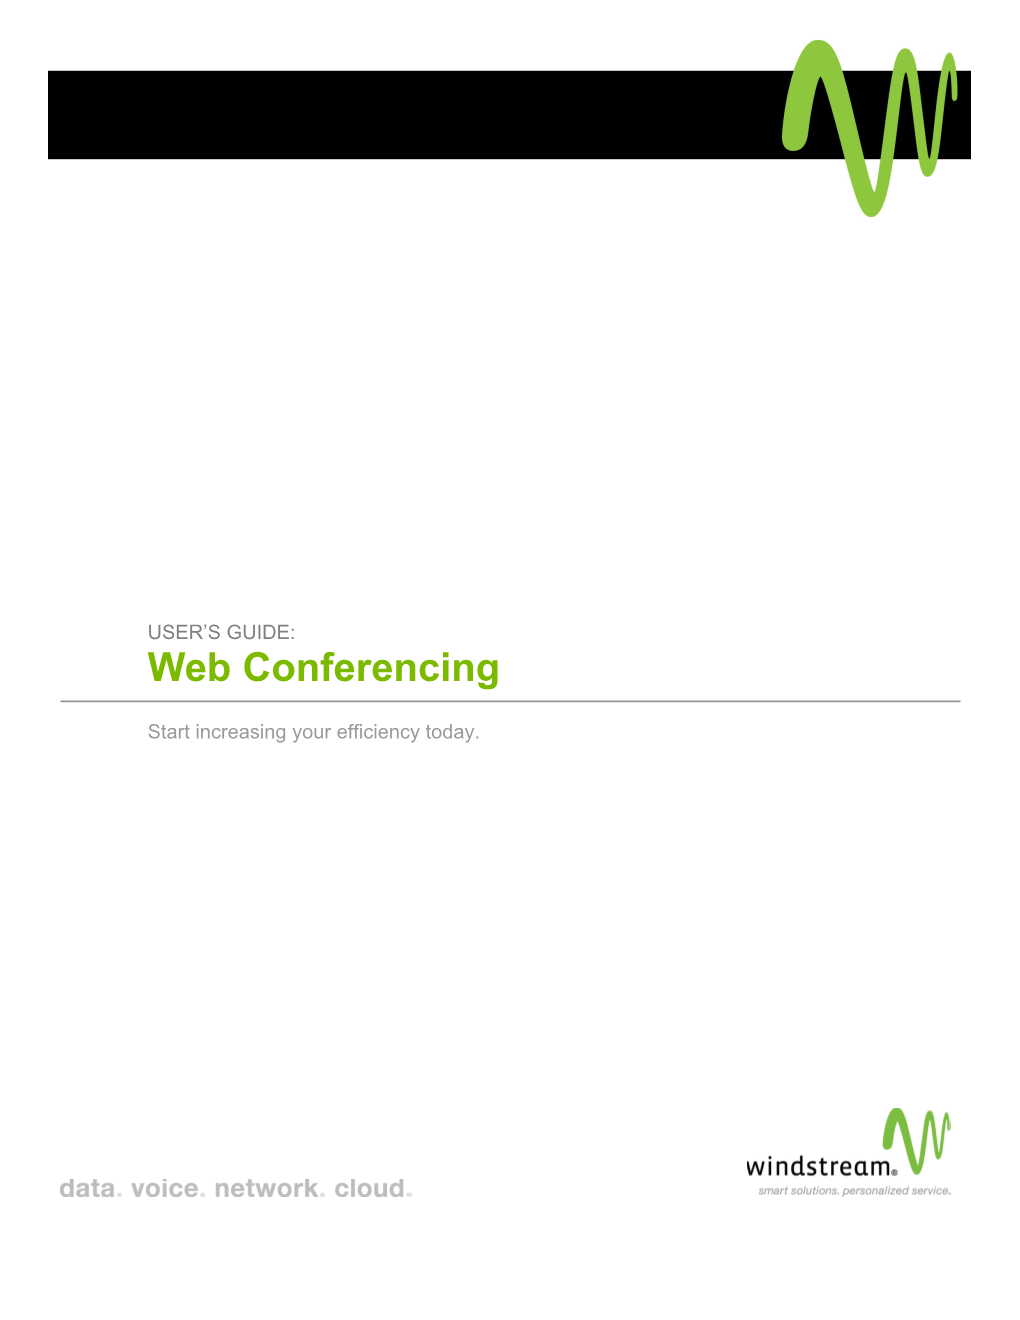 Web Conferencing Guide